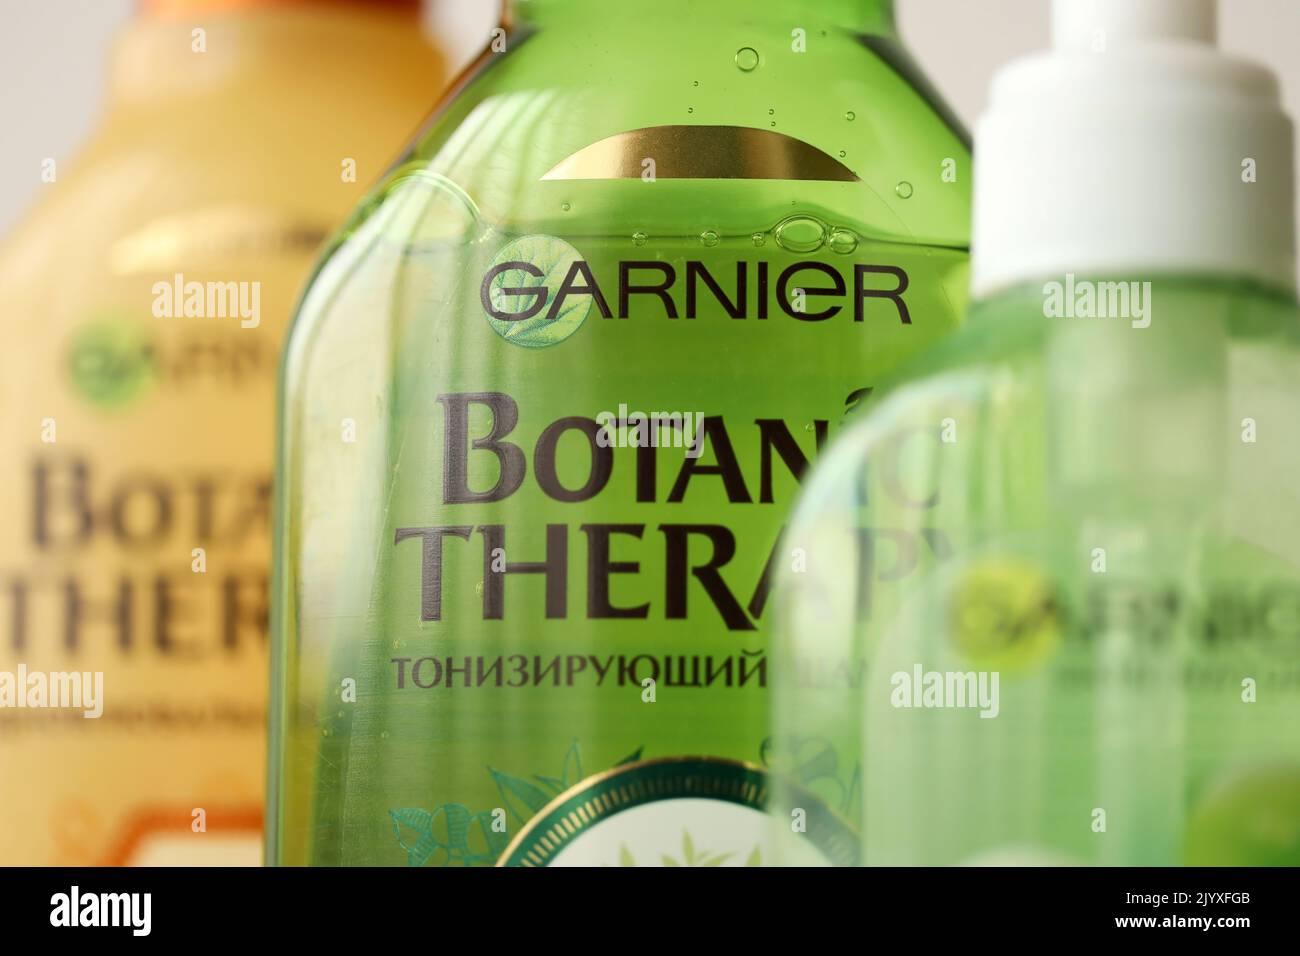 TERNOPIL, UKRAINE - SEPTEMBER 2, 2022 Bottle of Garnier Botanic Therapy Green Tea Shampoo among another Garnier company products close up Stock Photo